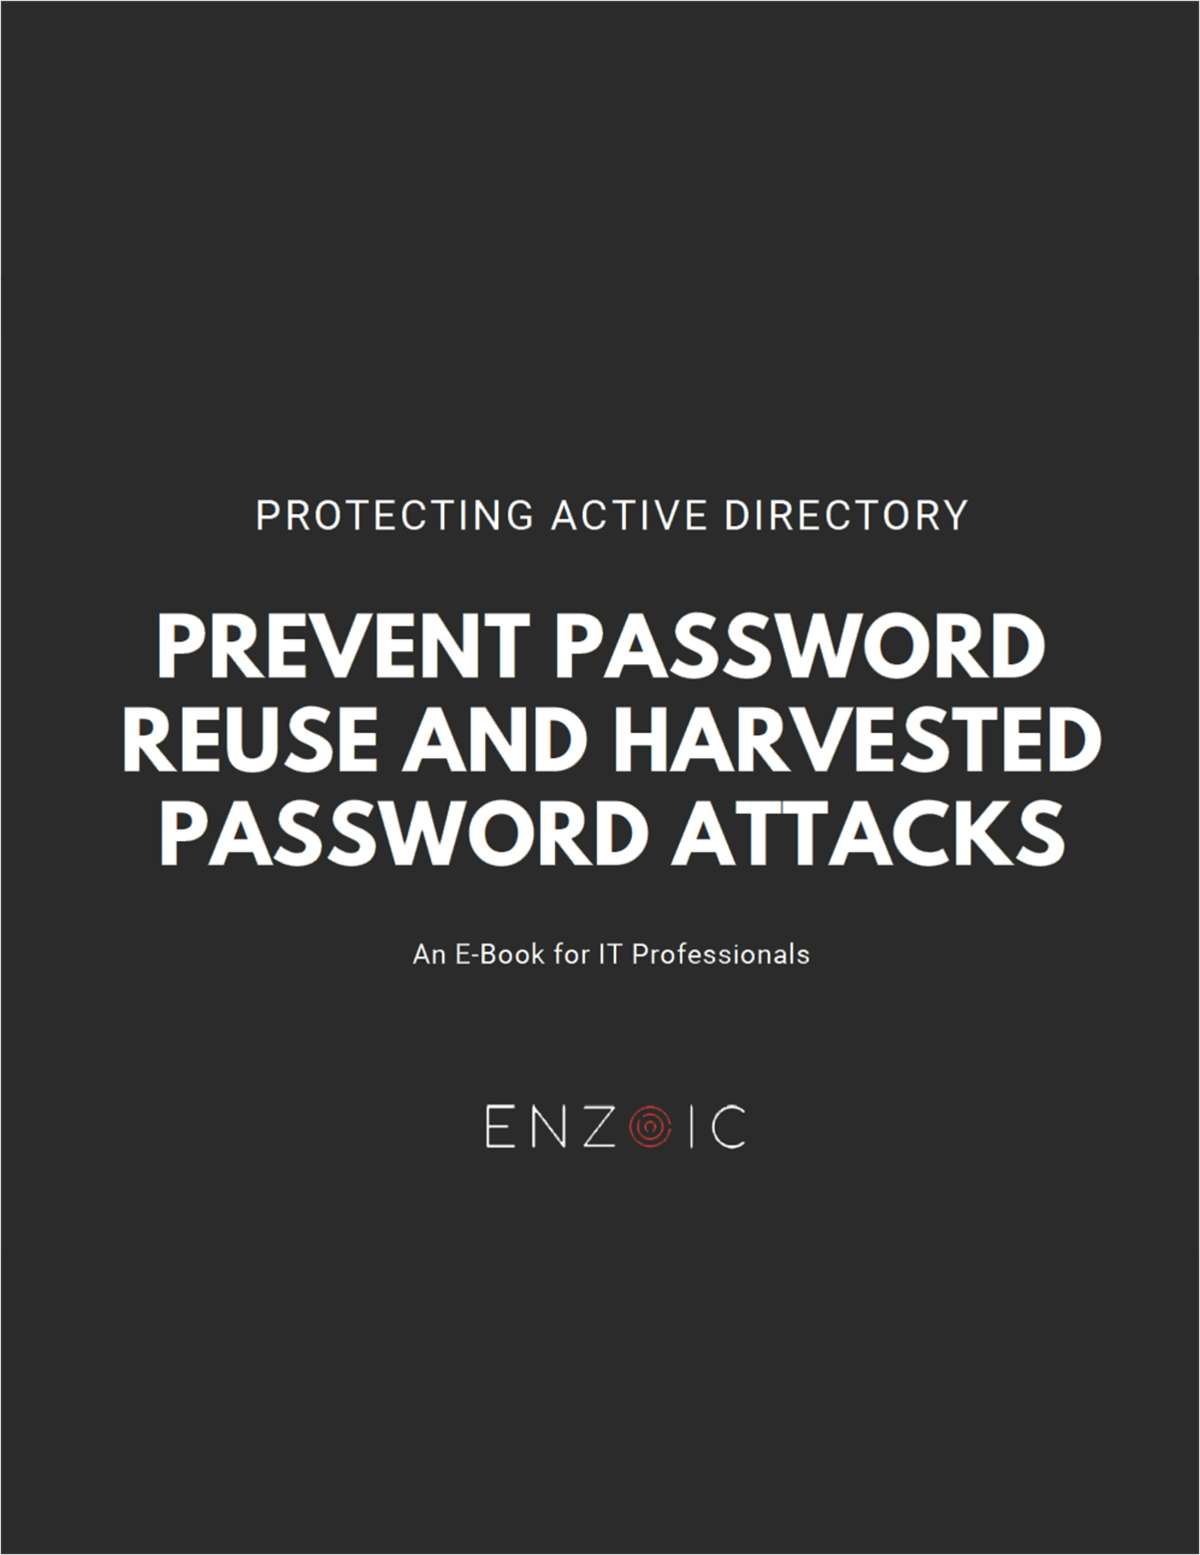 Protecting Active Directory - Prevent Password Reuse and Harvested Password Attacks